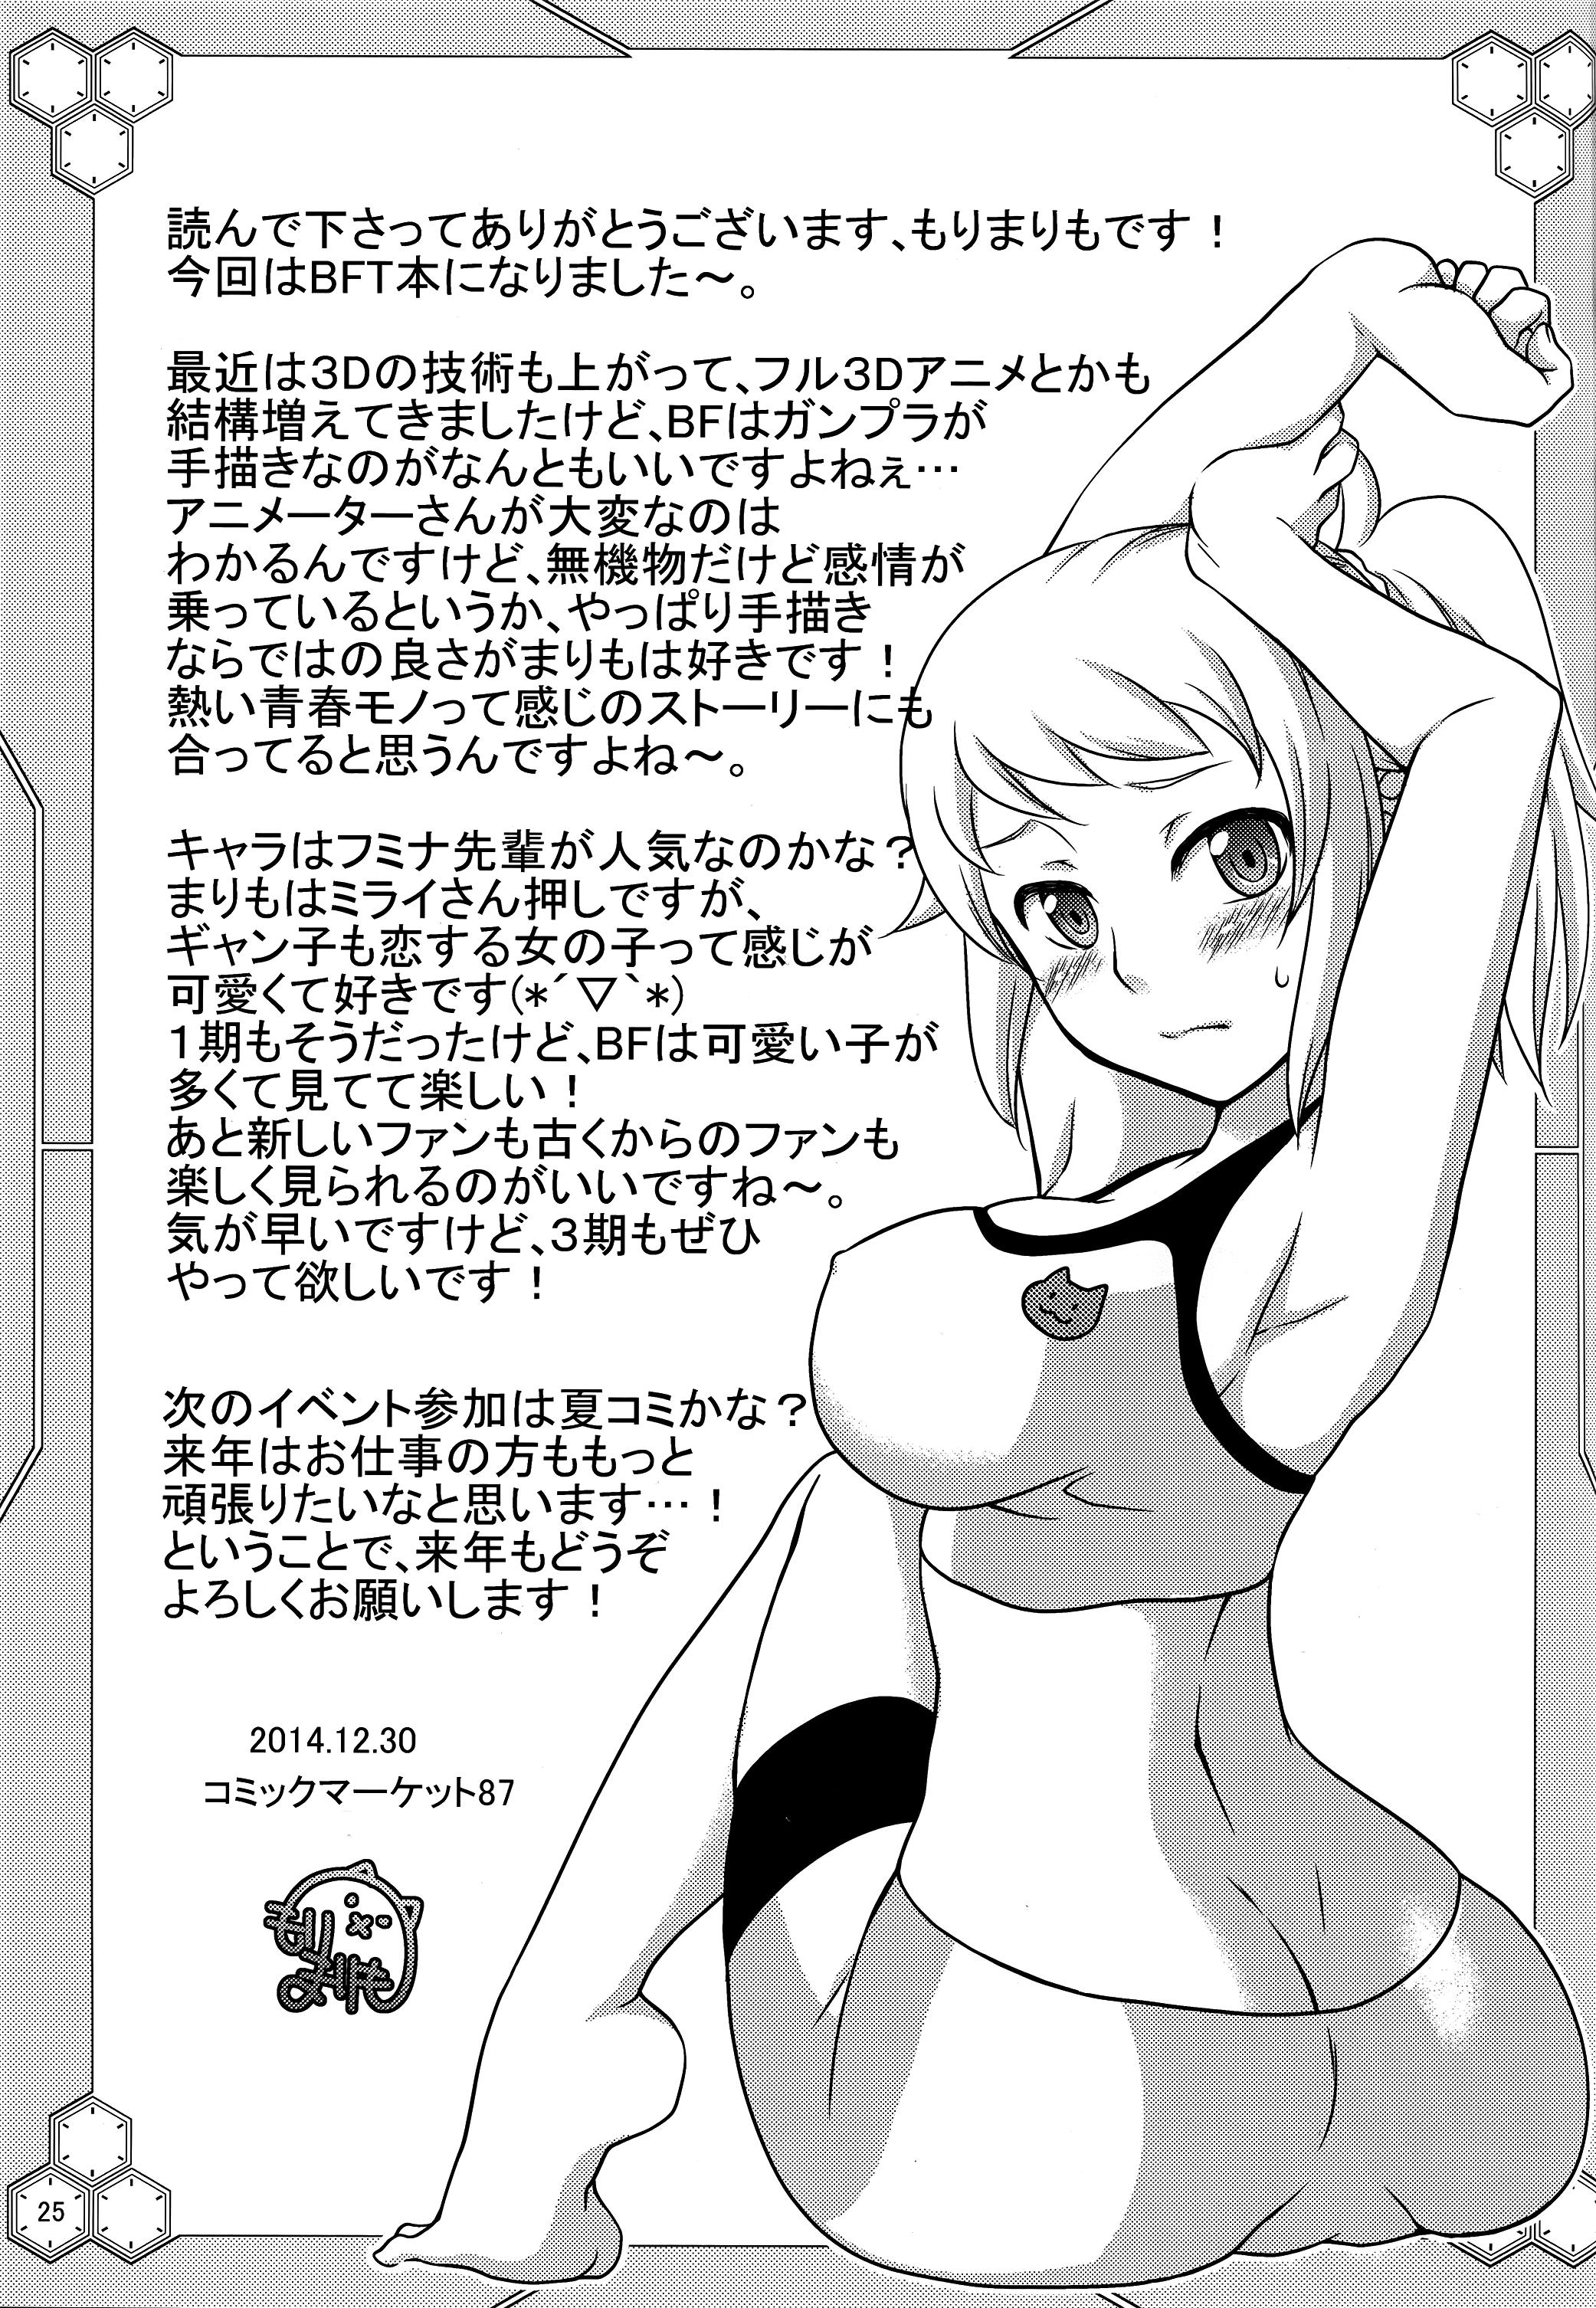 Rubia FIELD?? POOLSIDE - Gundam build fighters try Blond - Page 25